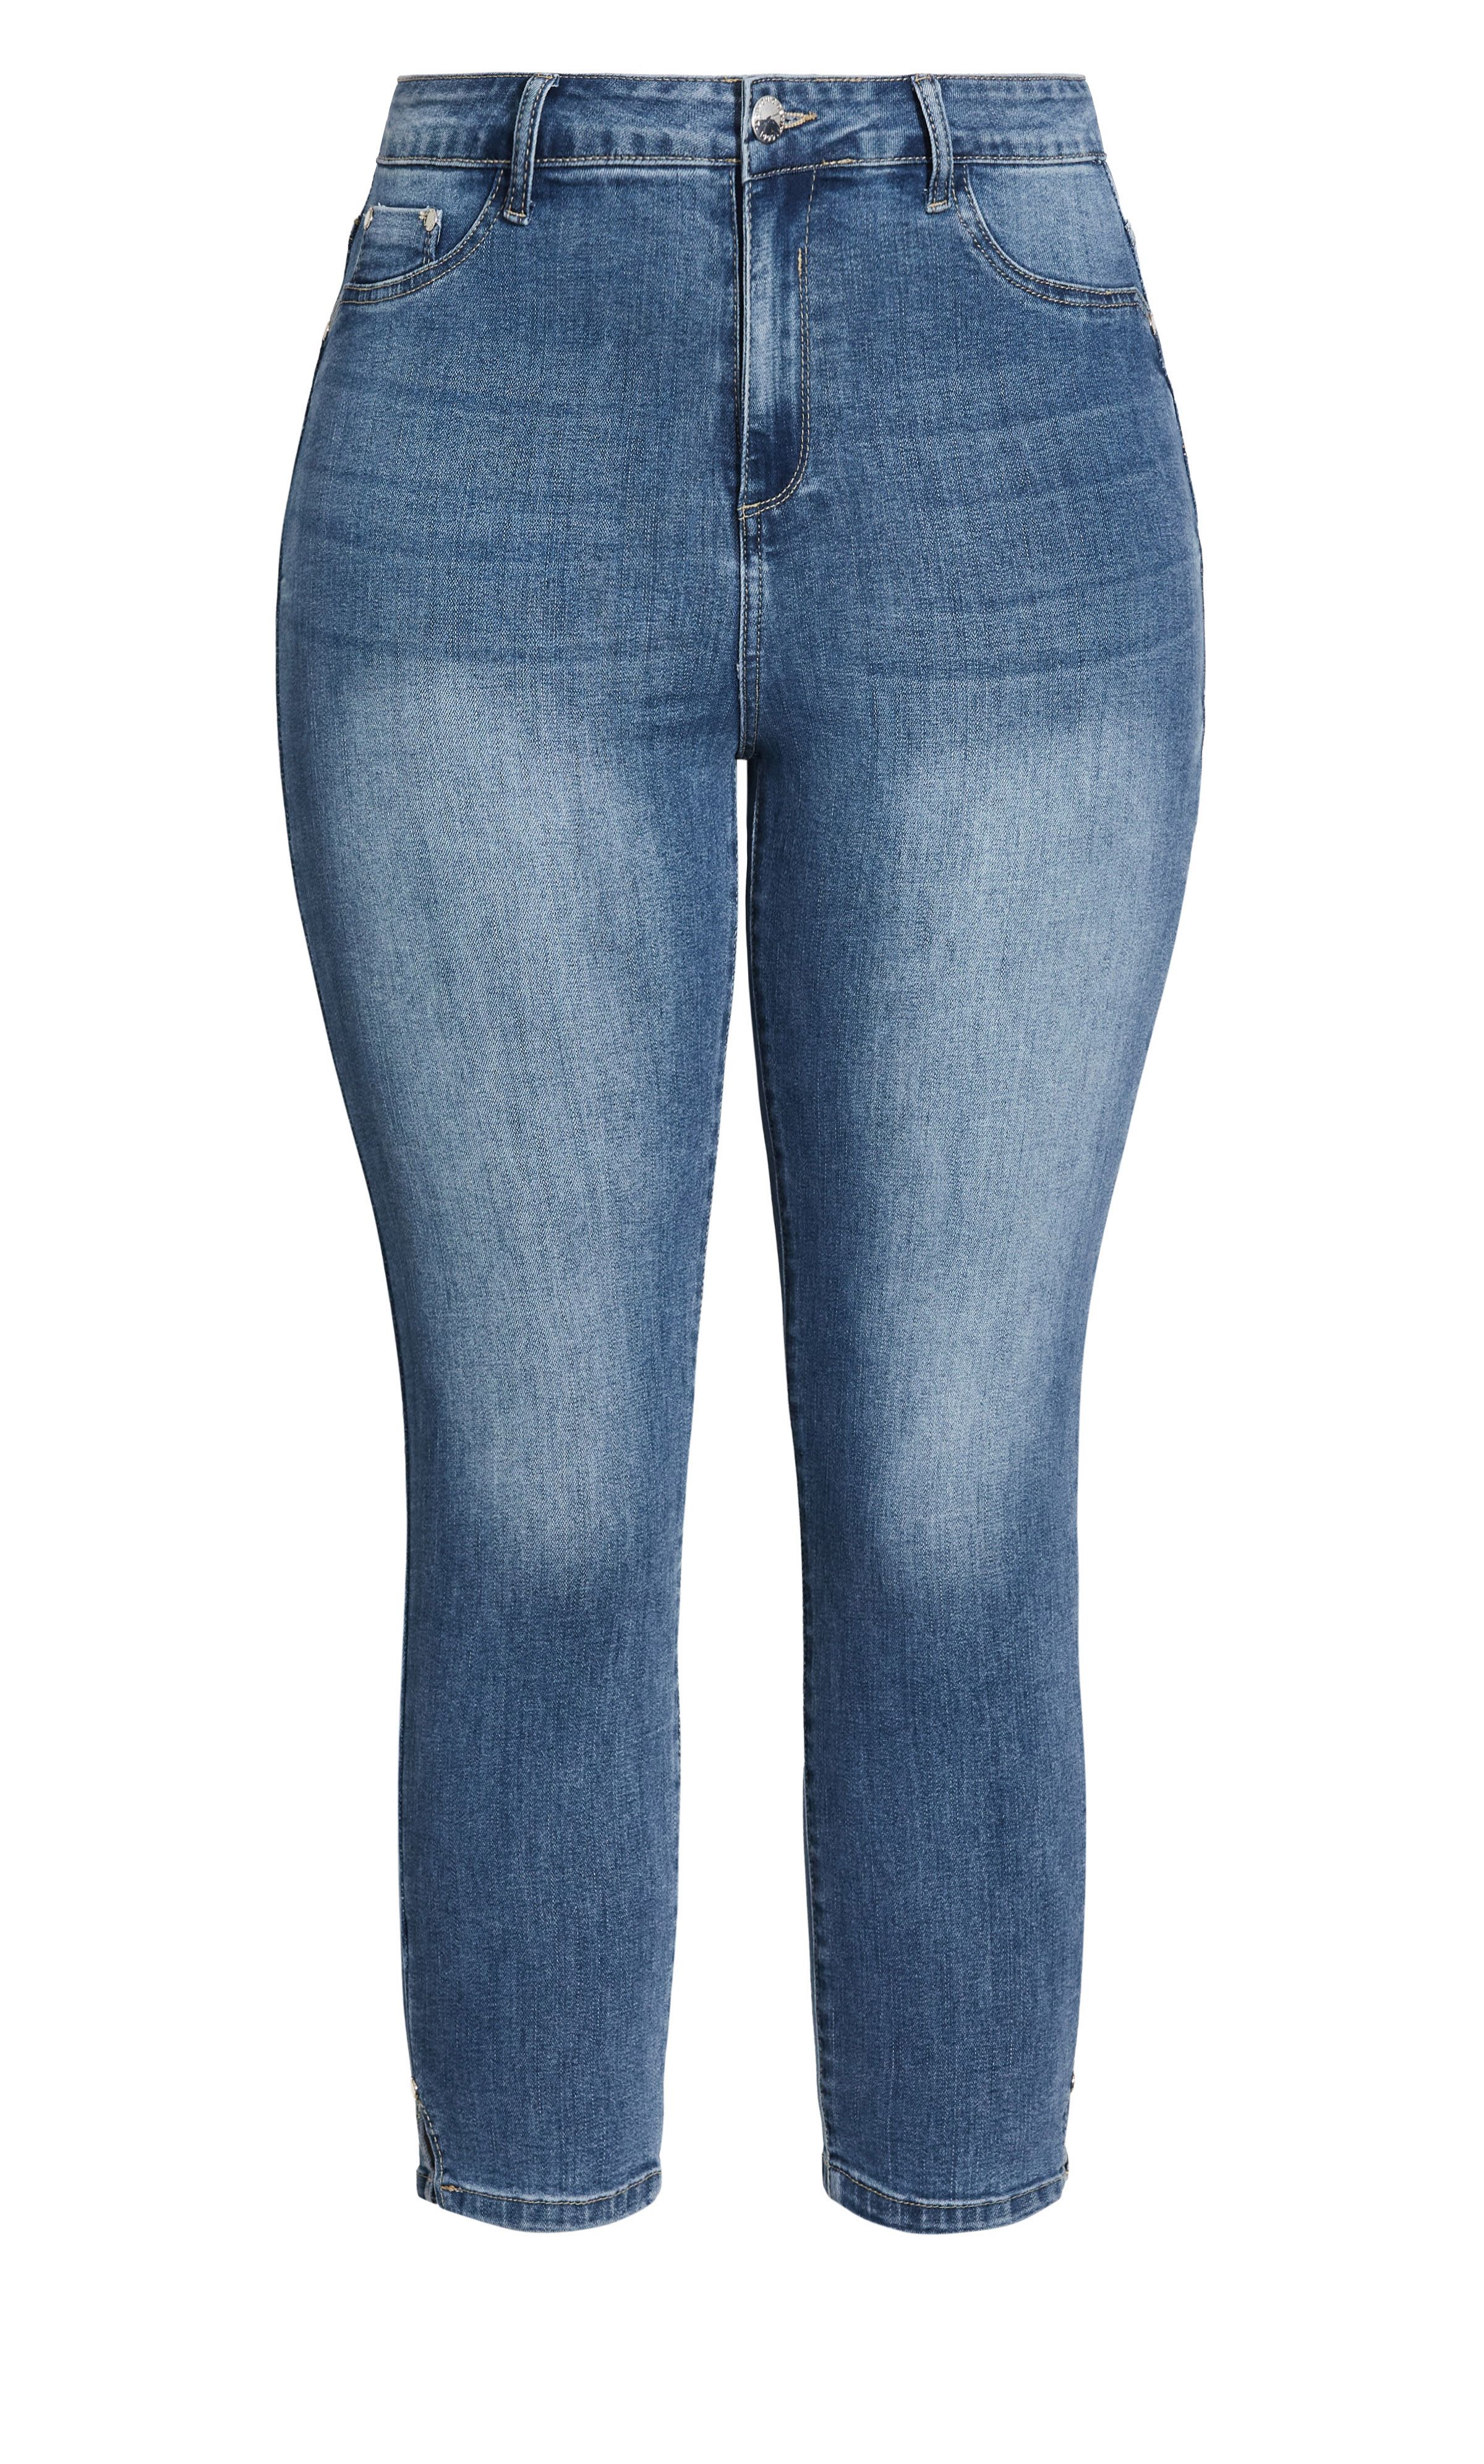 The Harley Renegade Jean will have you flaunting your killer curves in no time! This fashion-forward pair offers the perfect fit for an hourglass shape, complete with a mid rise waist and flattering cropped hemline. Key Features Include: - Harley: the perfect fit for an hourglass body shape - Mid rise - Single button & zip fly closure - 4-pocket denim styling - Stretch cotton blend fabrication - Skinny leg - High denim fibre retention to maintain shape - Signature Chic Denim hardware throughout zips, buttons and rivets - Cropped length We love these jeans with a breezy blouse, lace up block heels and chic baguette bag.